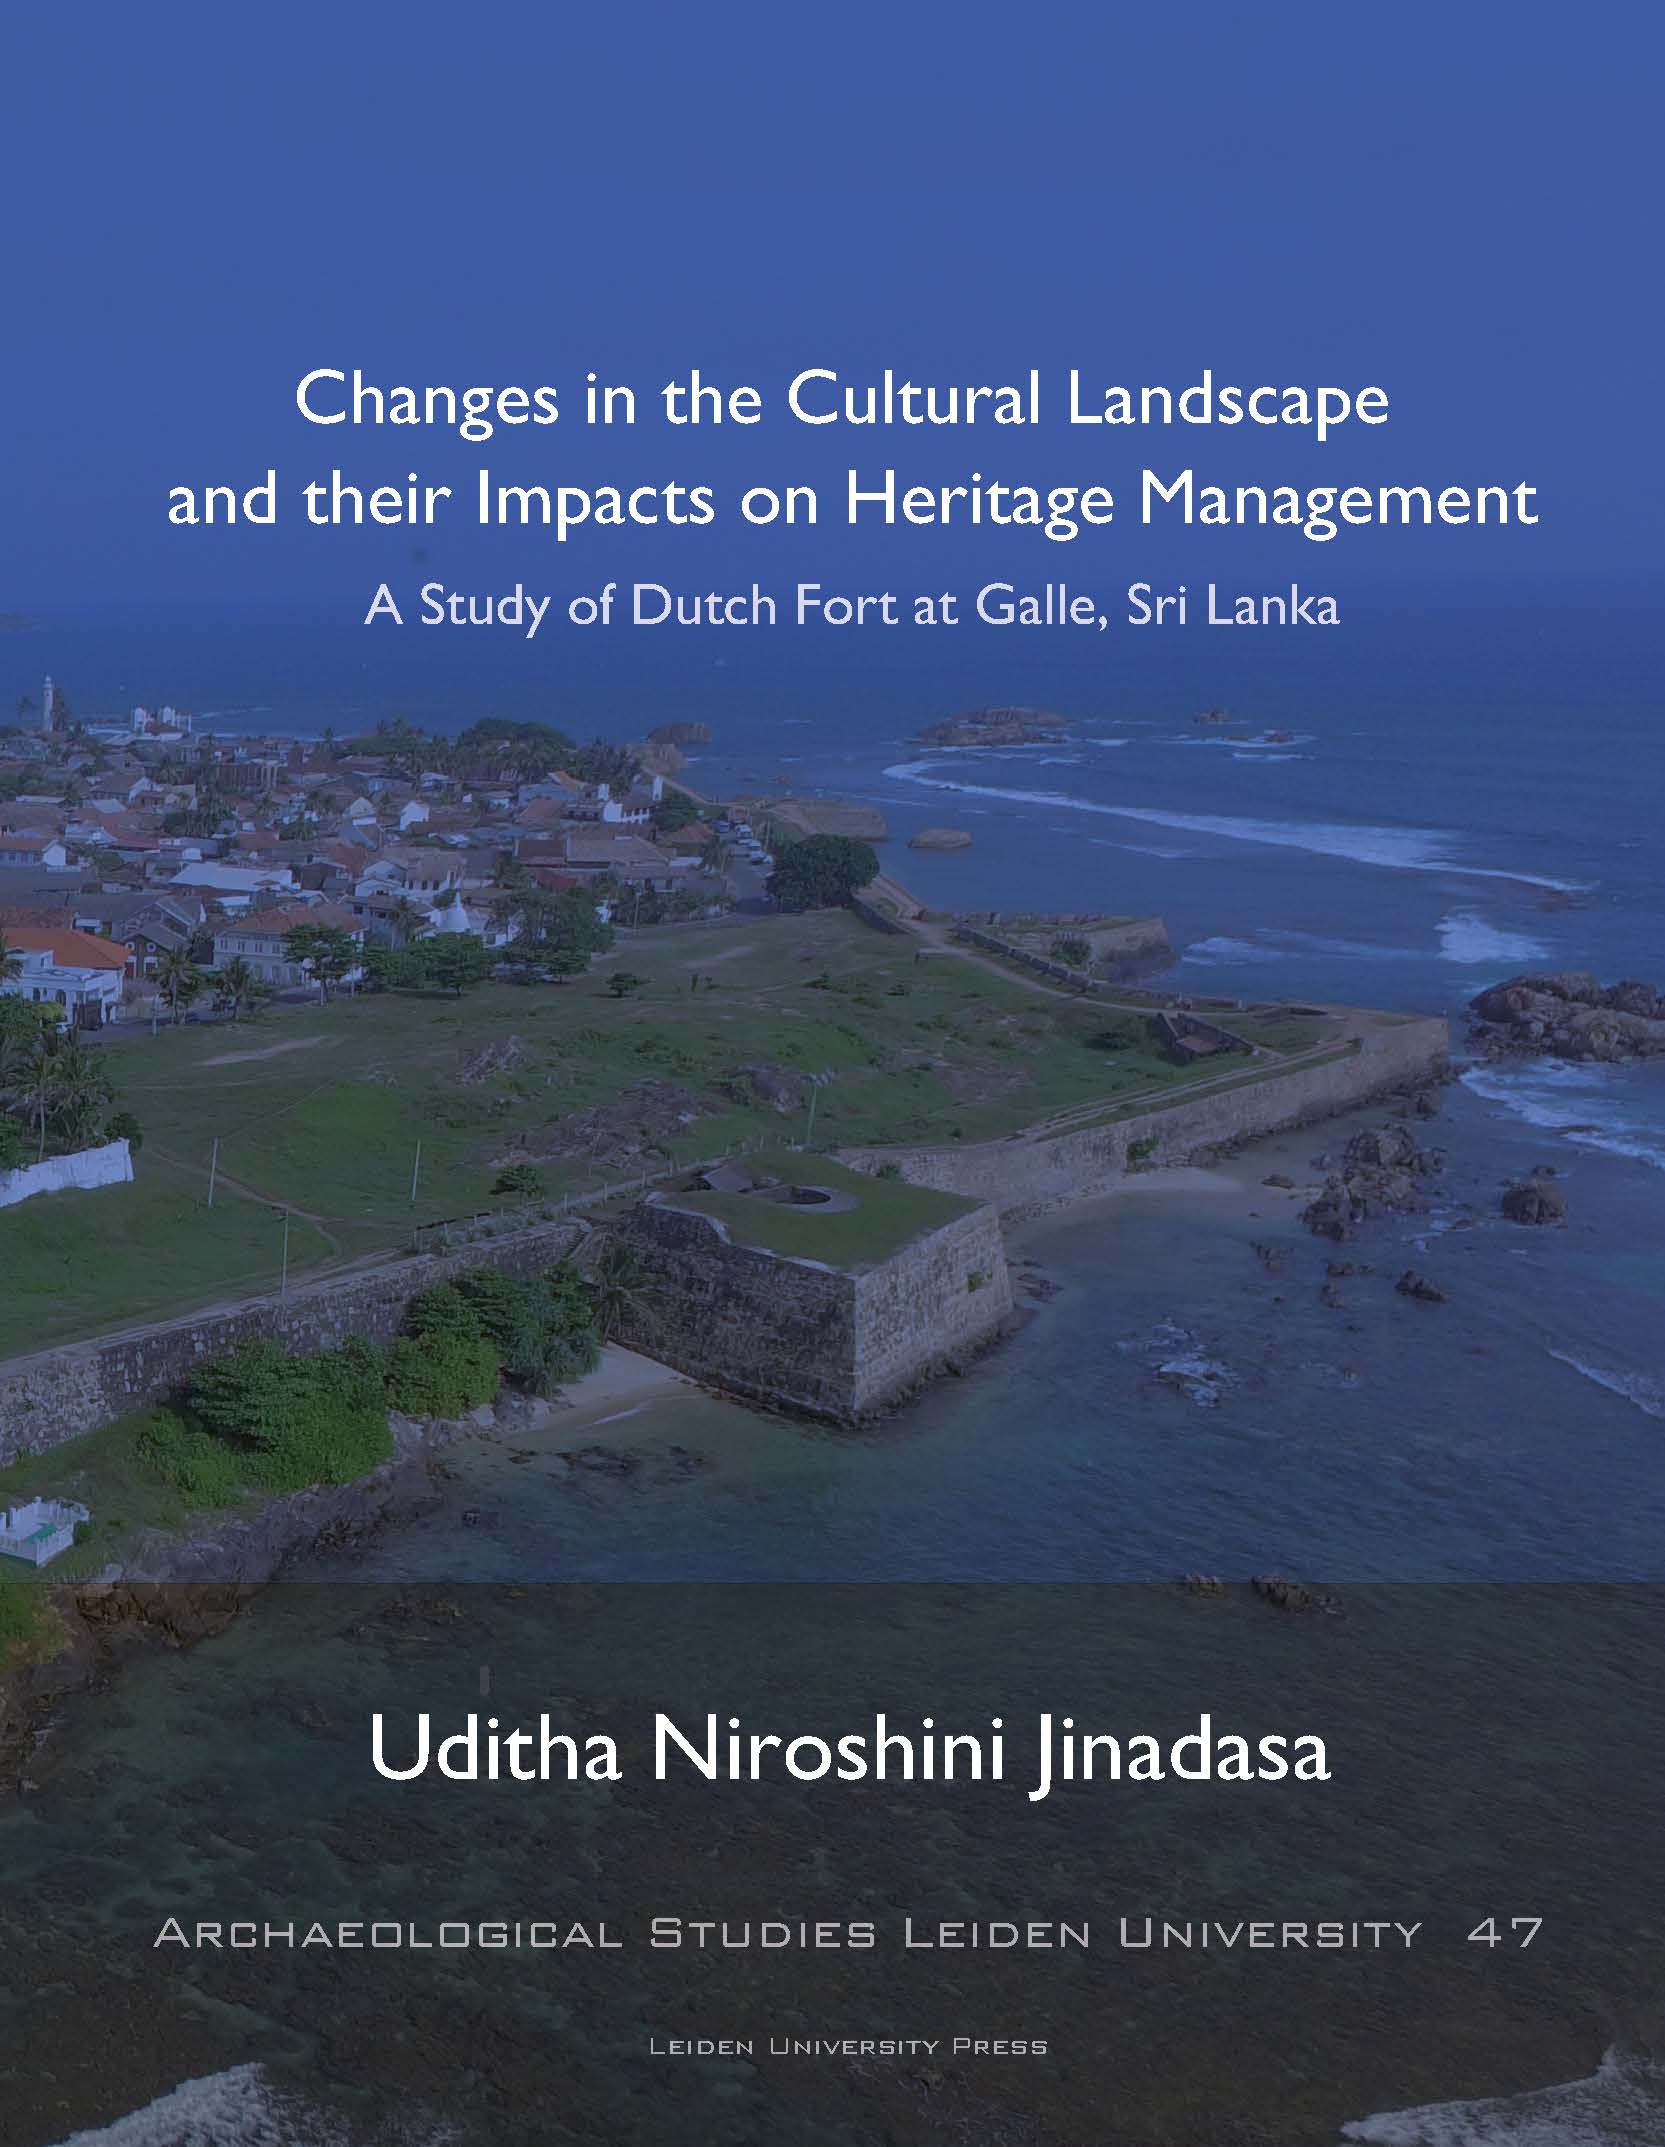 Landscape　on　University　Heritage　Impacts　and　the　Management　Amsterdam　in　their　Cultural　Changes　Press